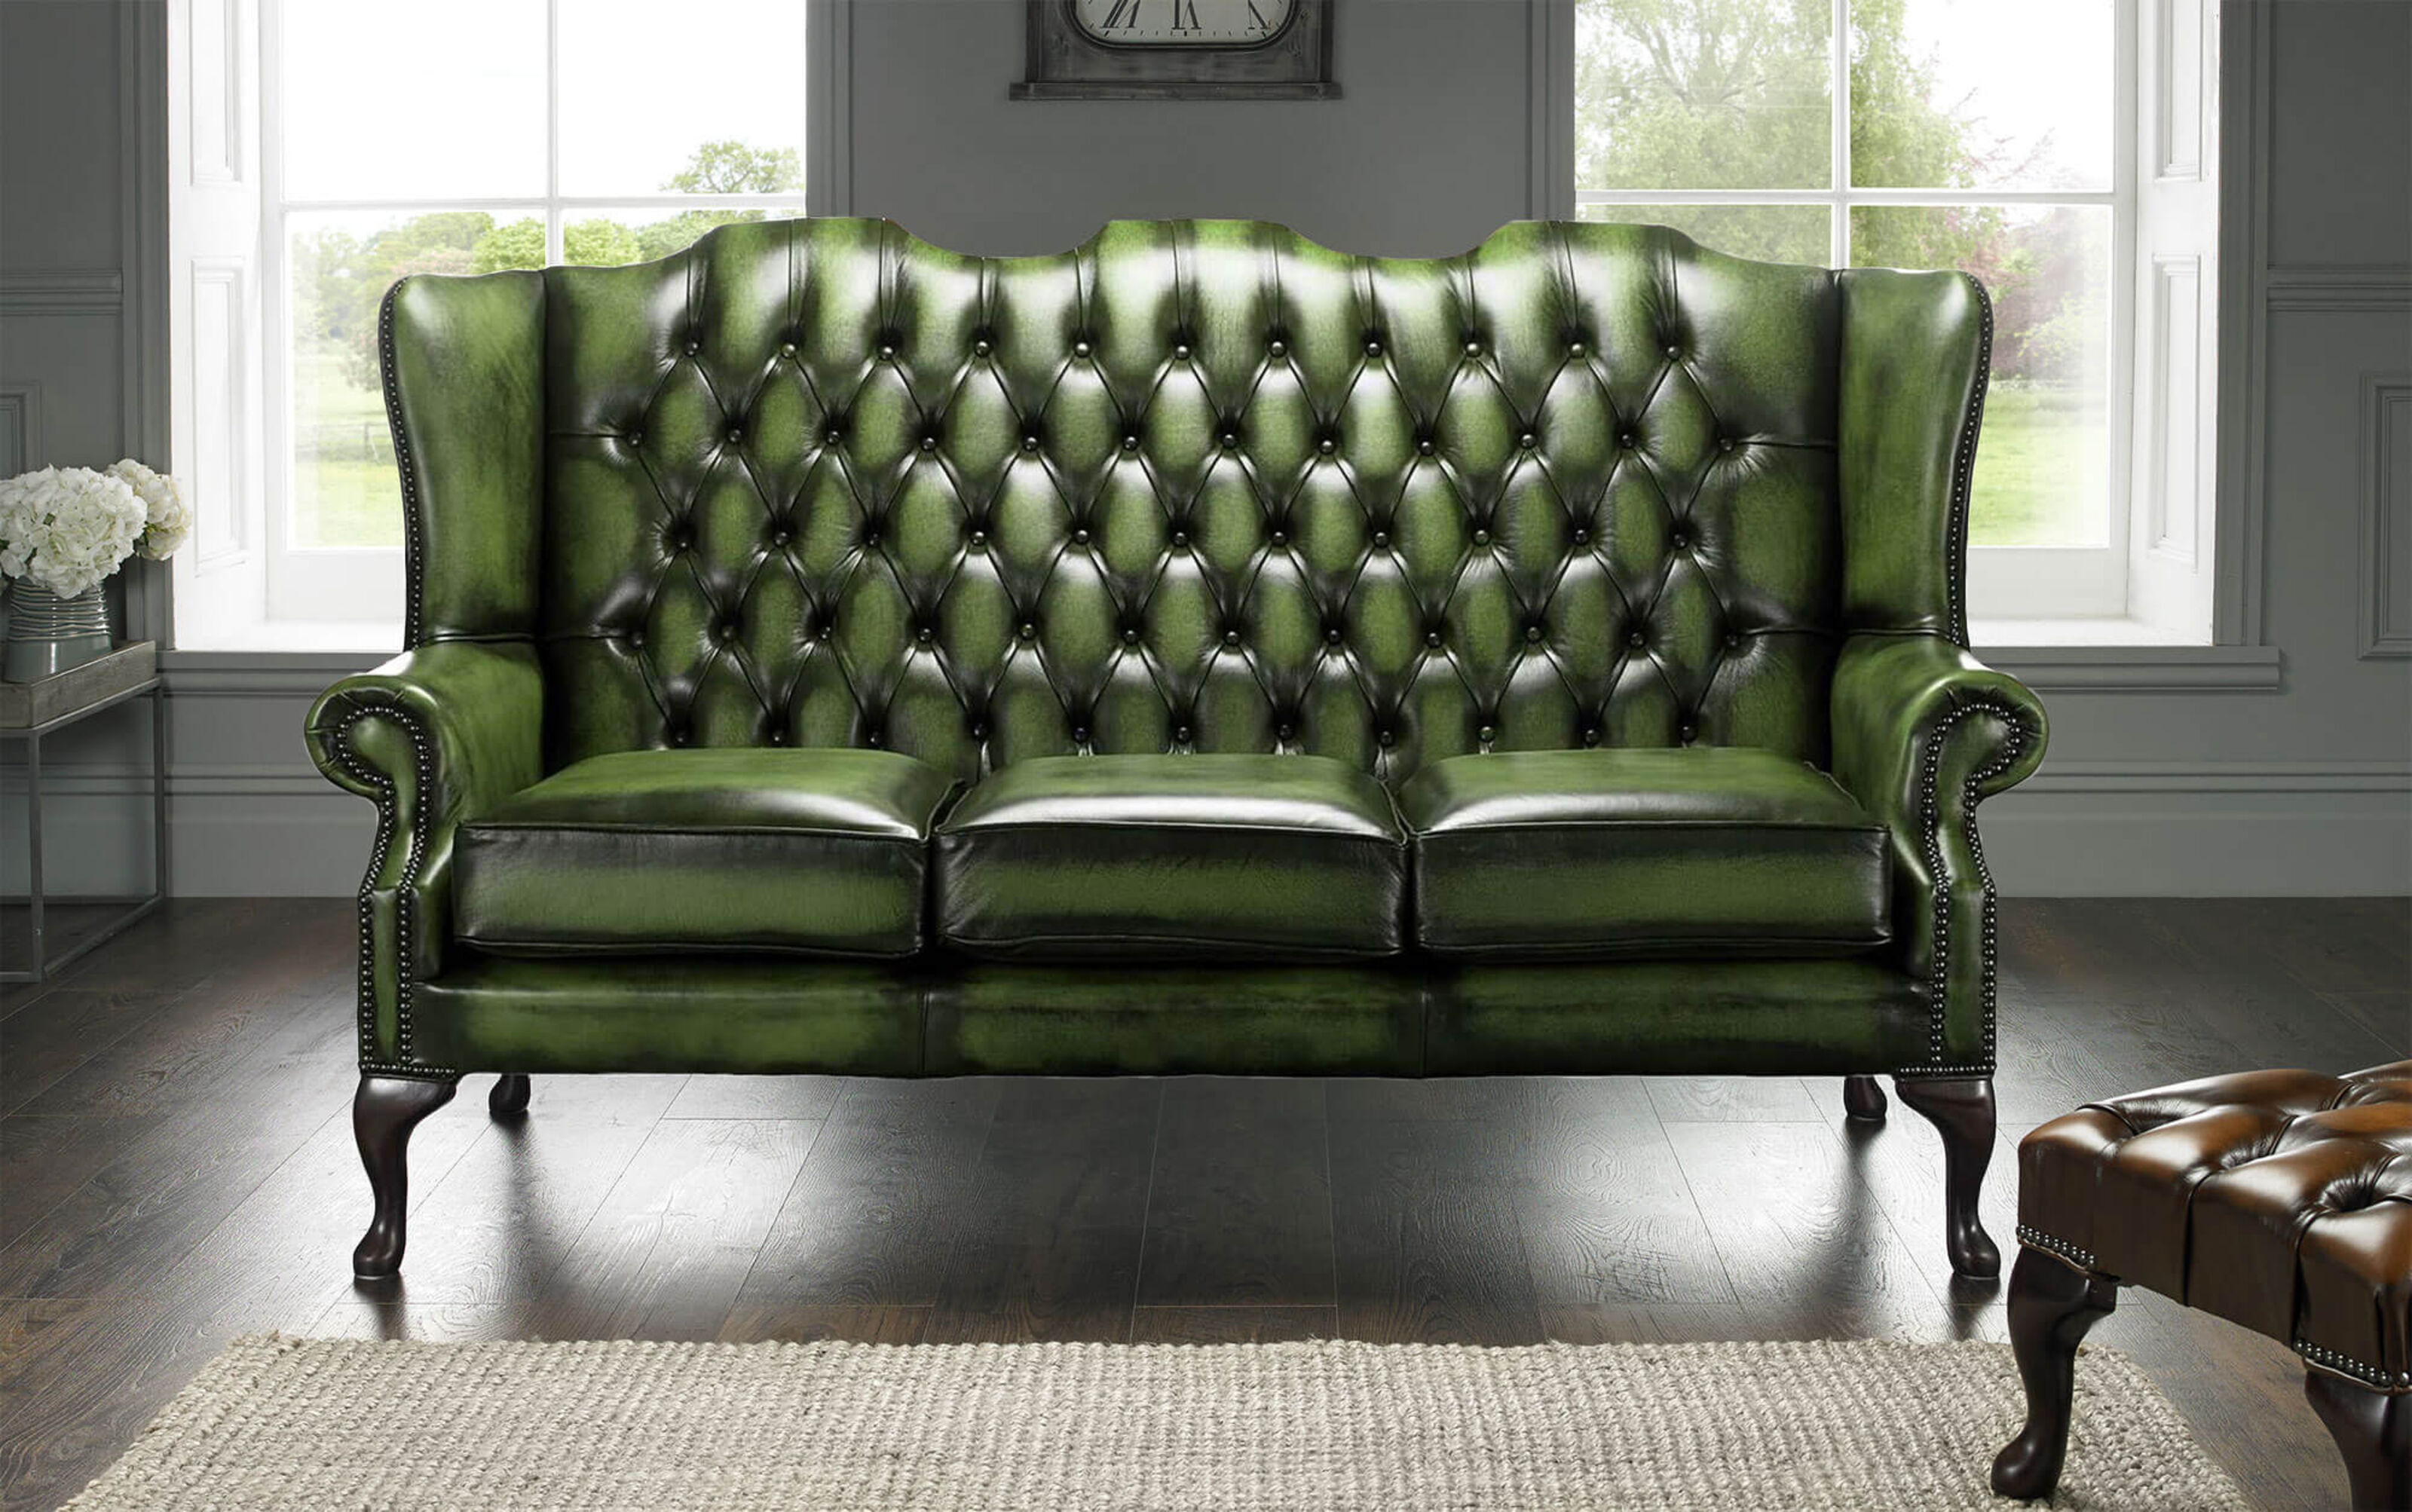 Elevated Elegance: Chesterfield Sofas Featuring High Back Designs  %Post Title